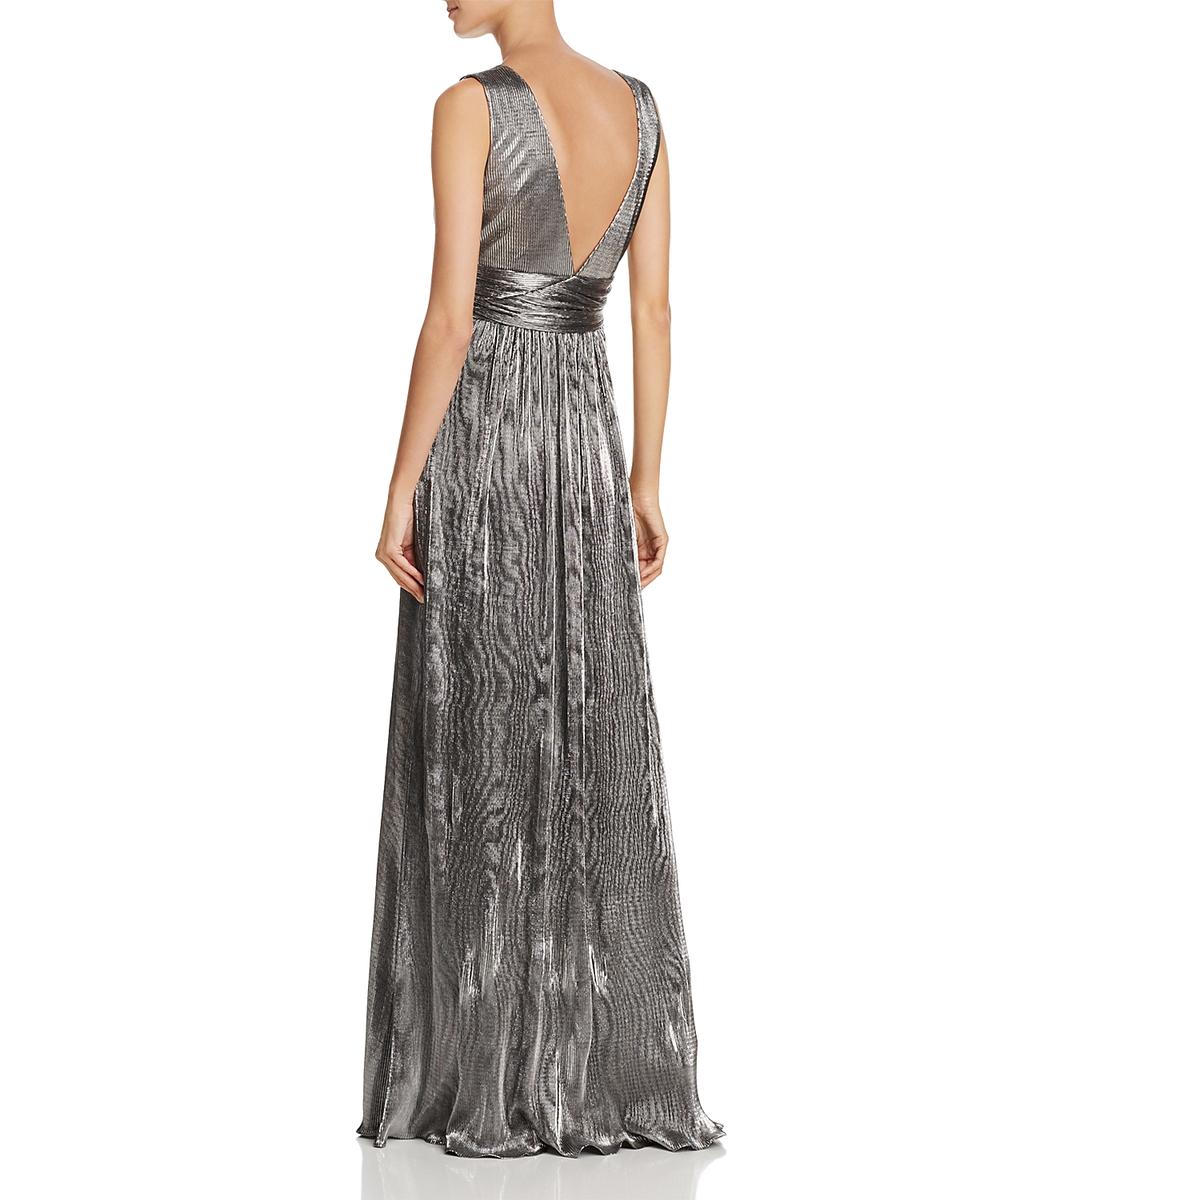 Laundry by Shelli Segal Womens Silver Metallic Evening Dress Gown 2 ...